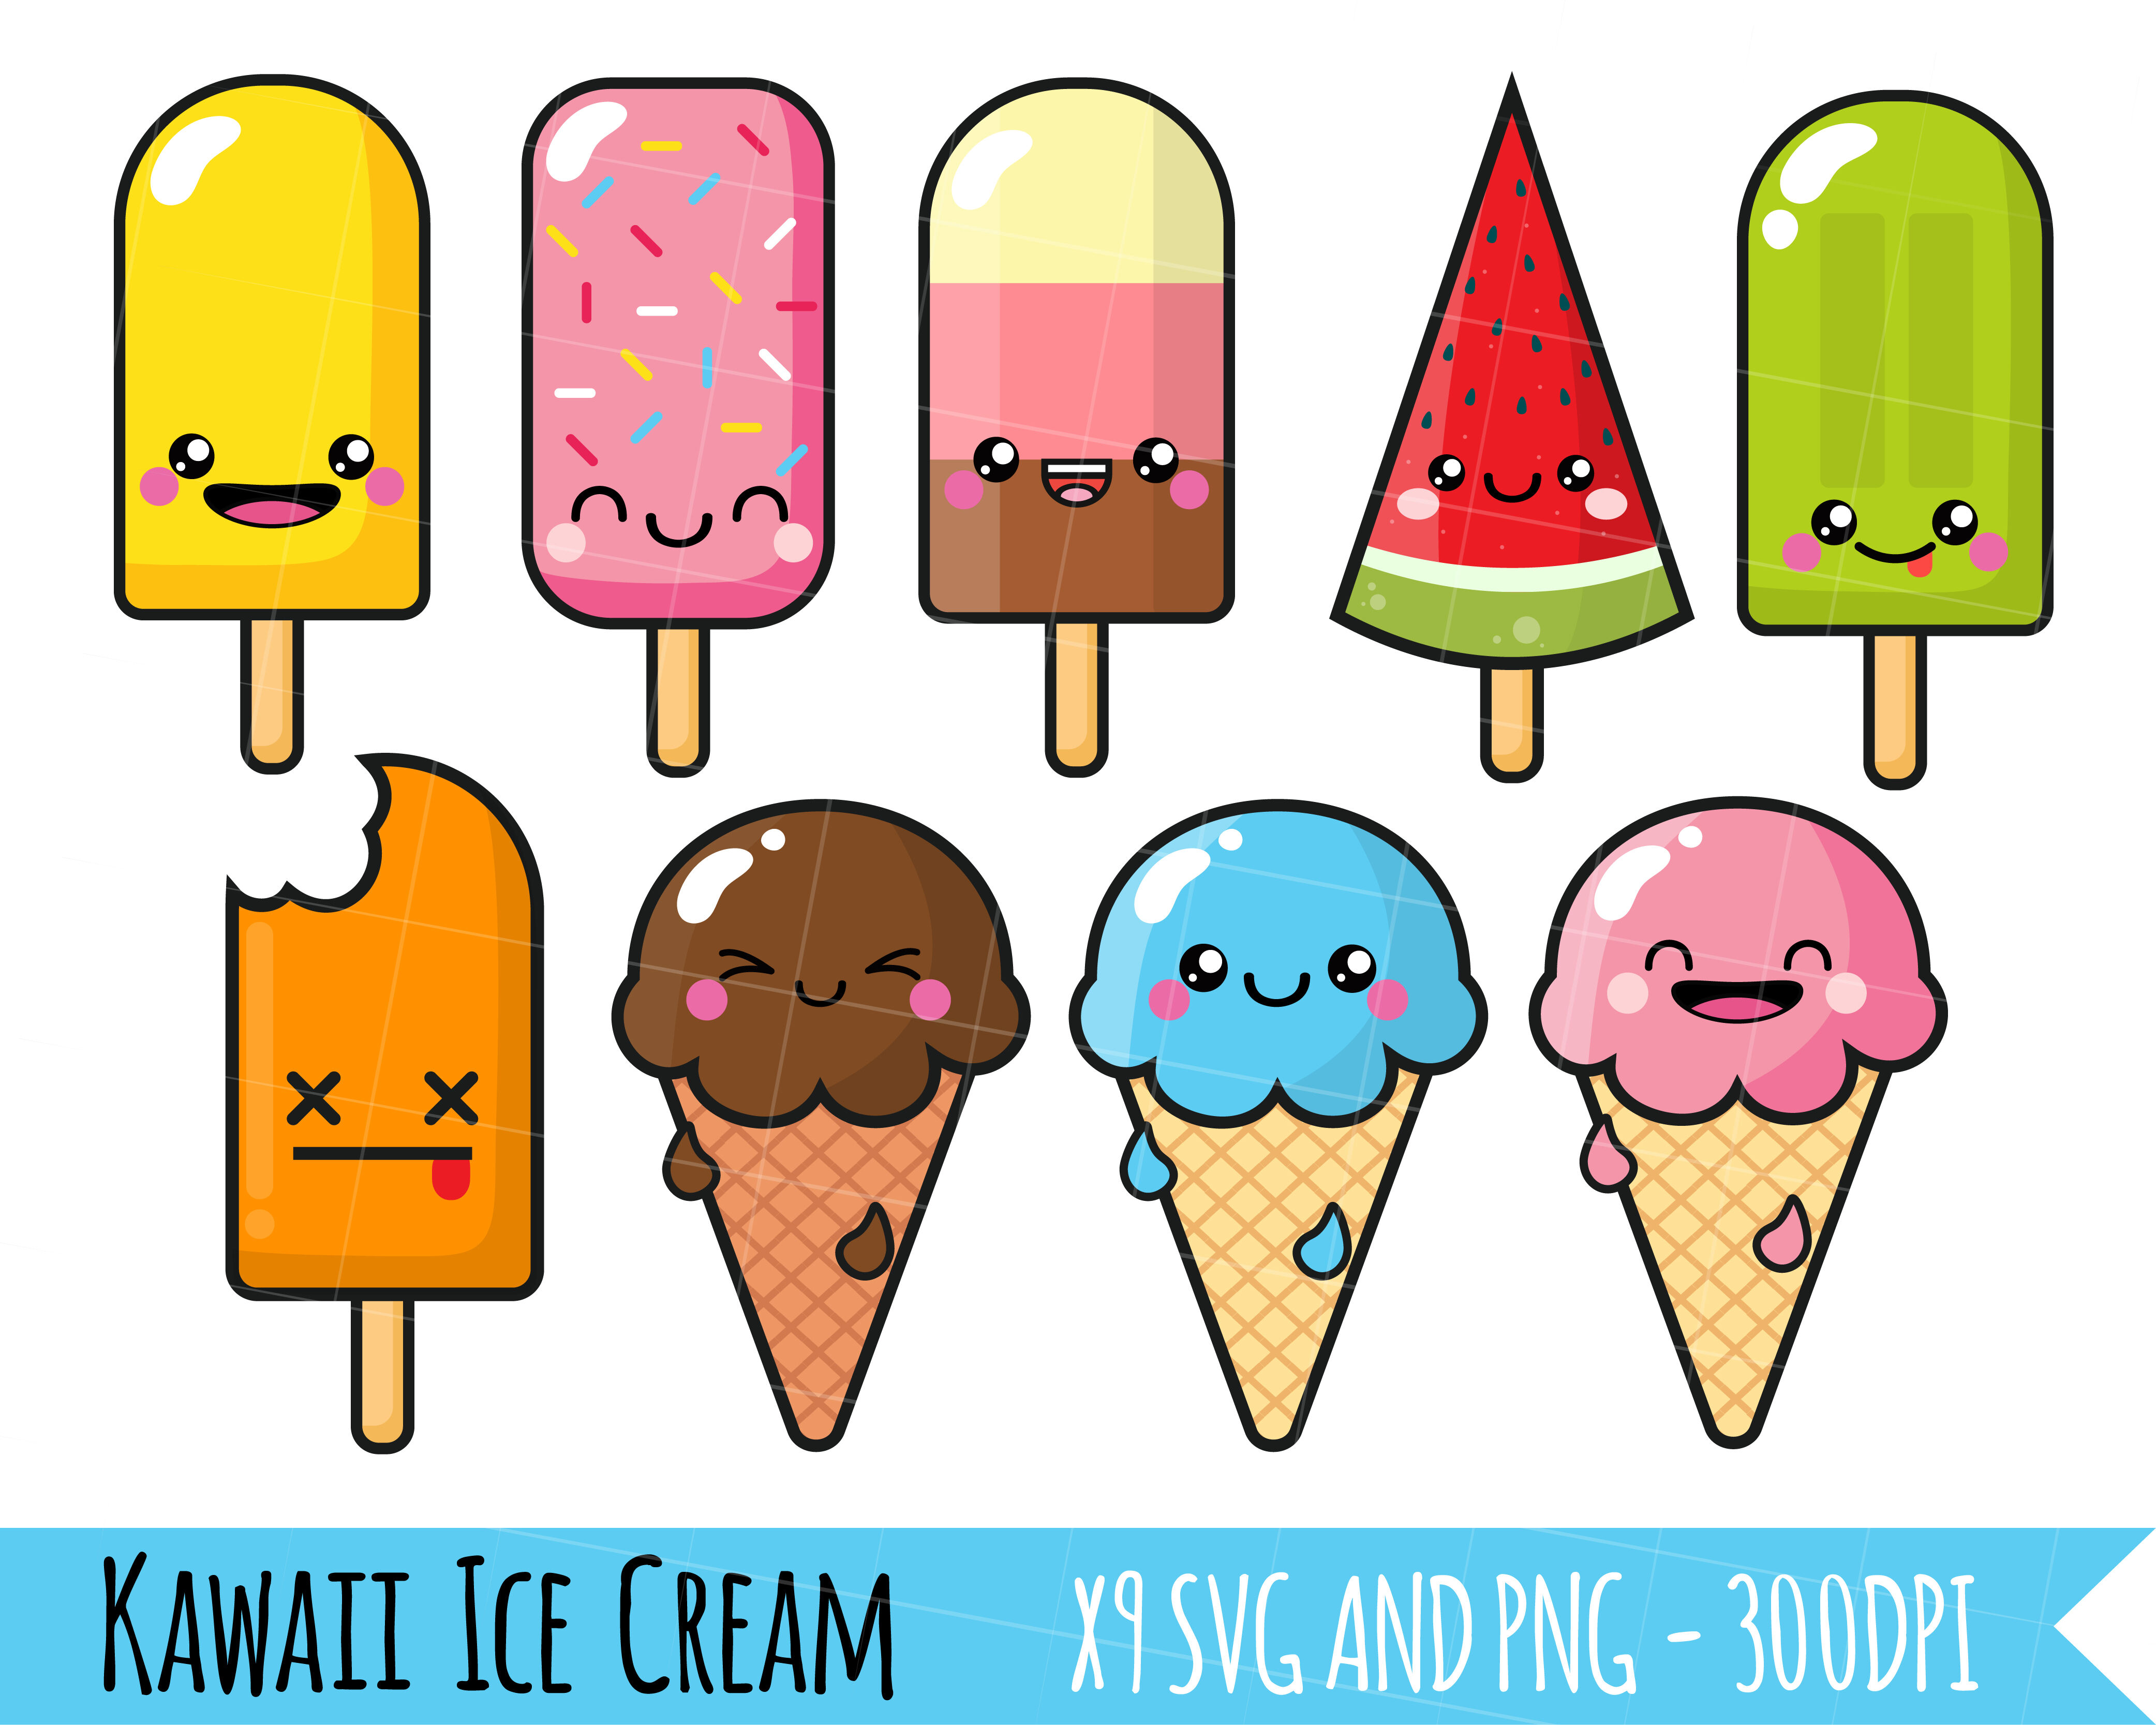 commercial use clipart popsicle